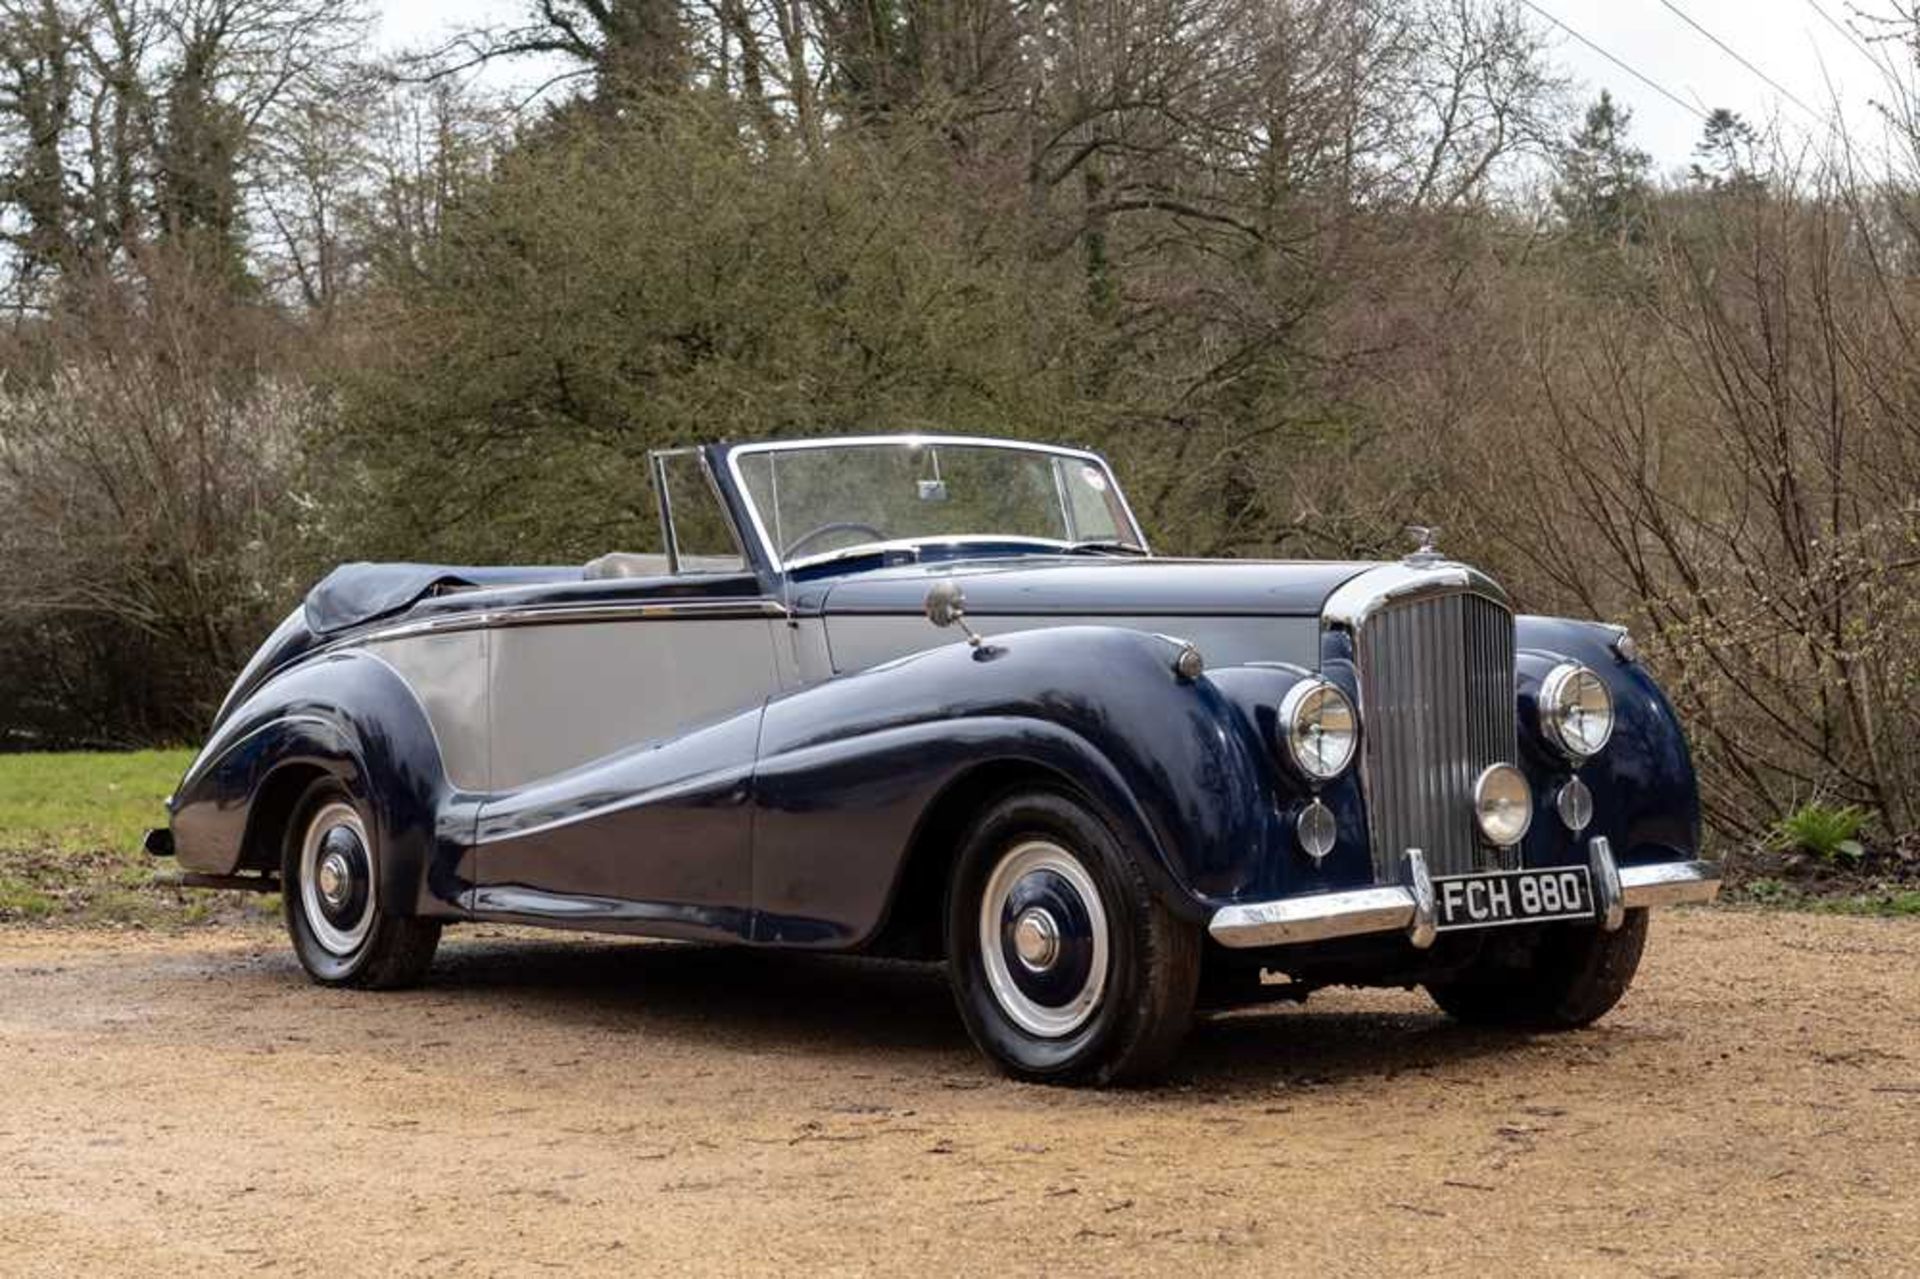 1954 Bentley R-Type Park Ward Drophead Coupe 1 of just 9 R-Type chassis clothed to Design 552 - Image 2 of 86